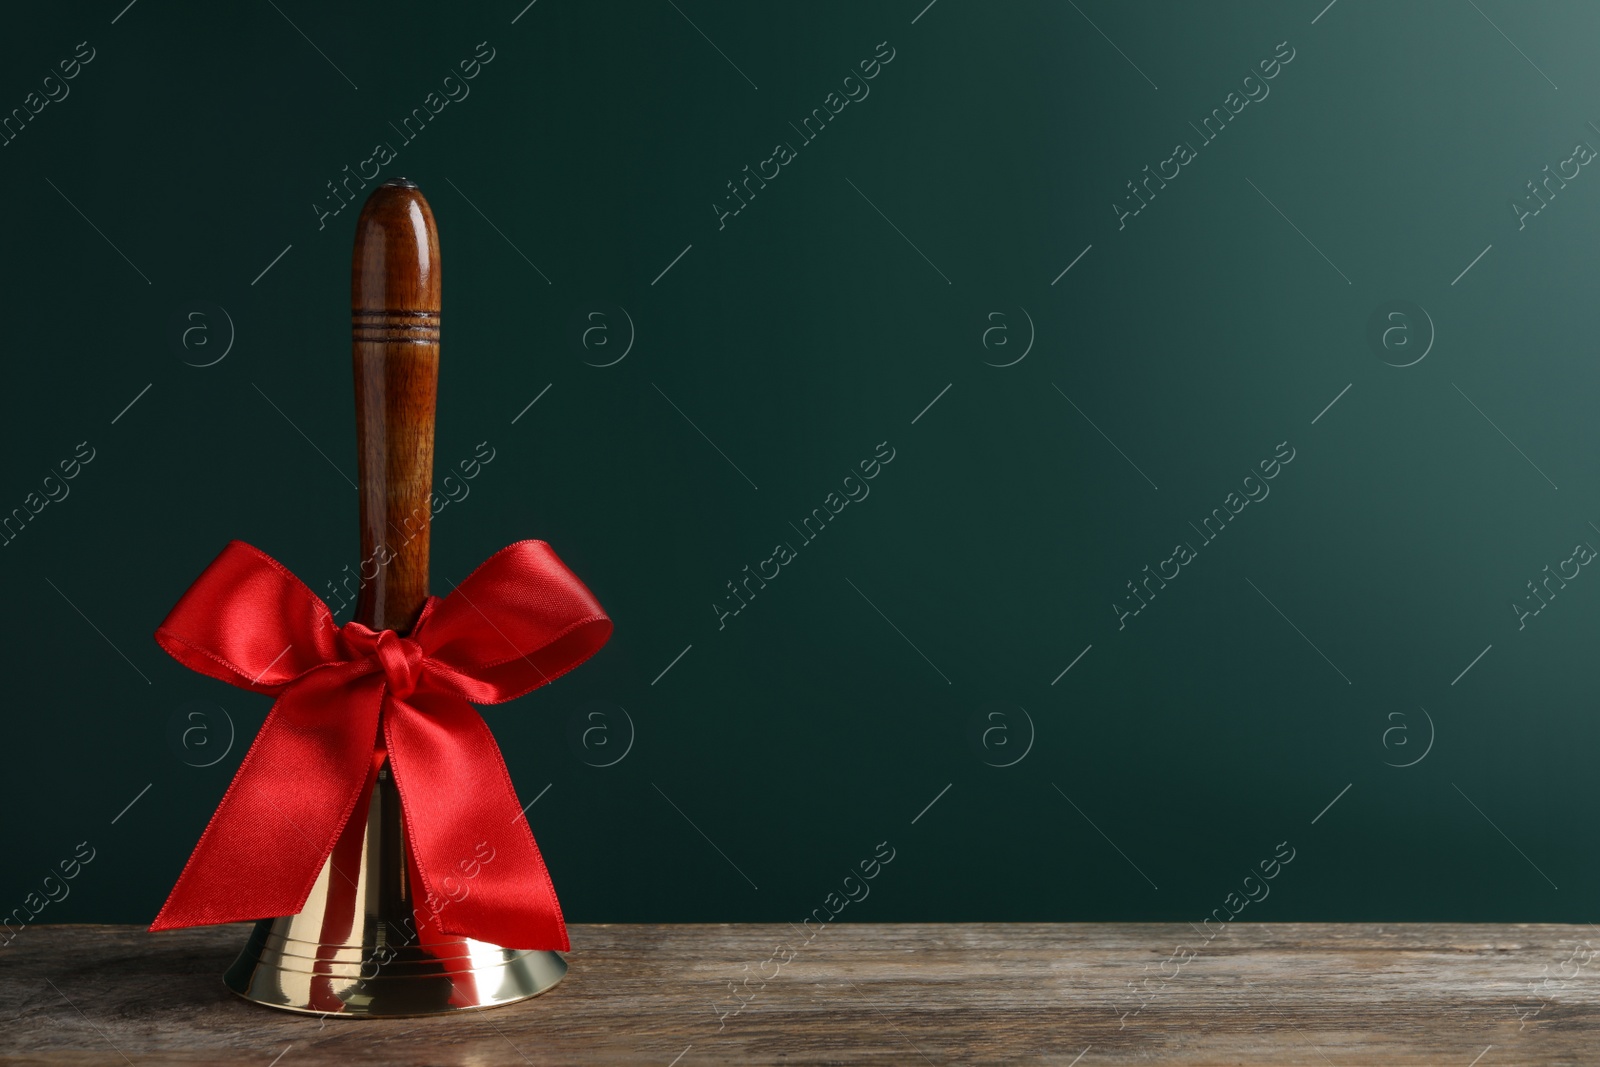 Photo of Golden bell with red bow on wooden table near green chalkboard, space for text. School days